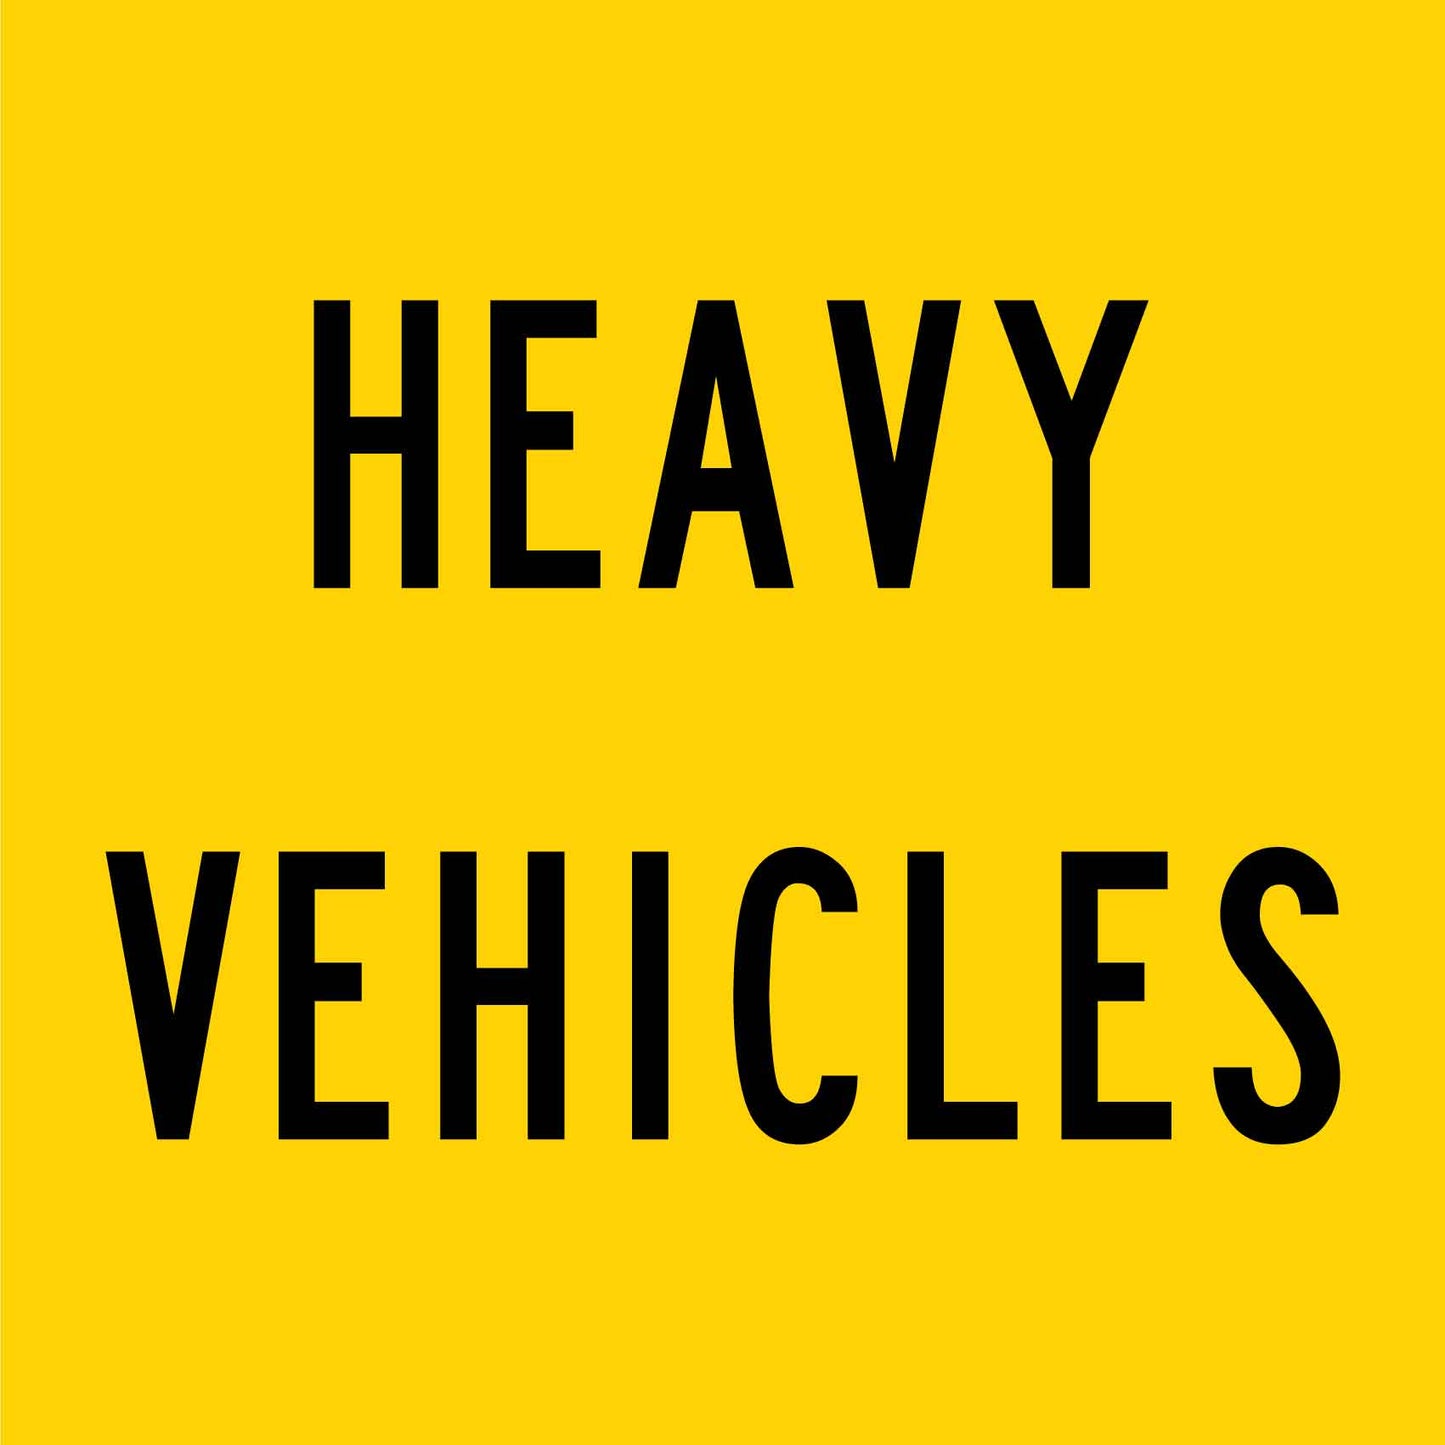 Heavy Vehicles Multi Message Reflective Traffic Sign